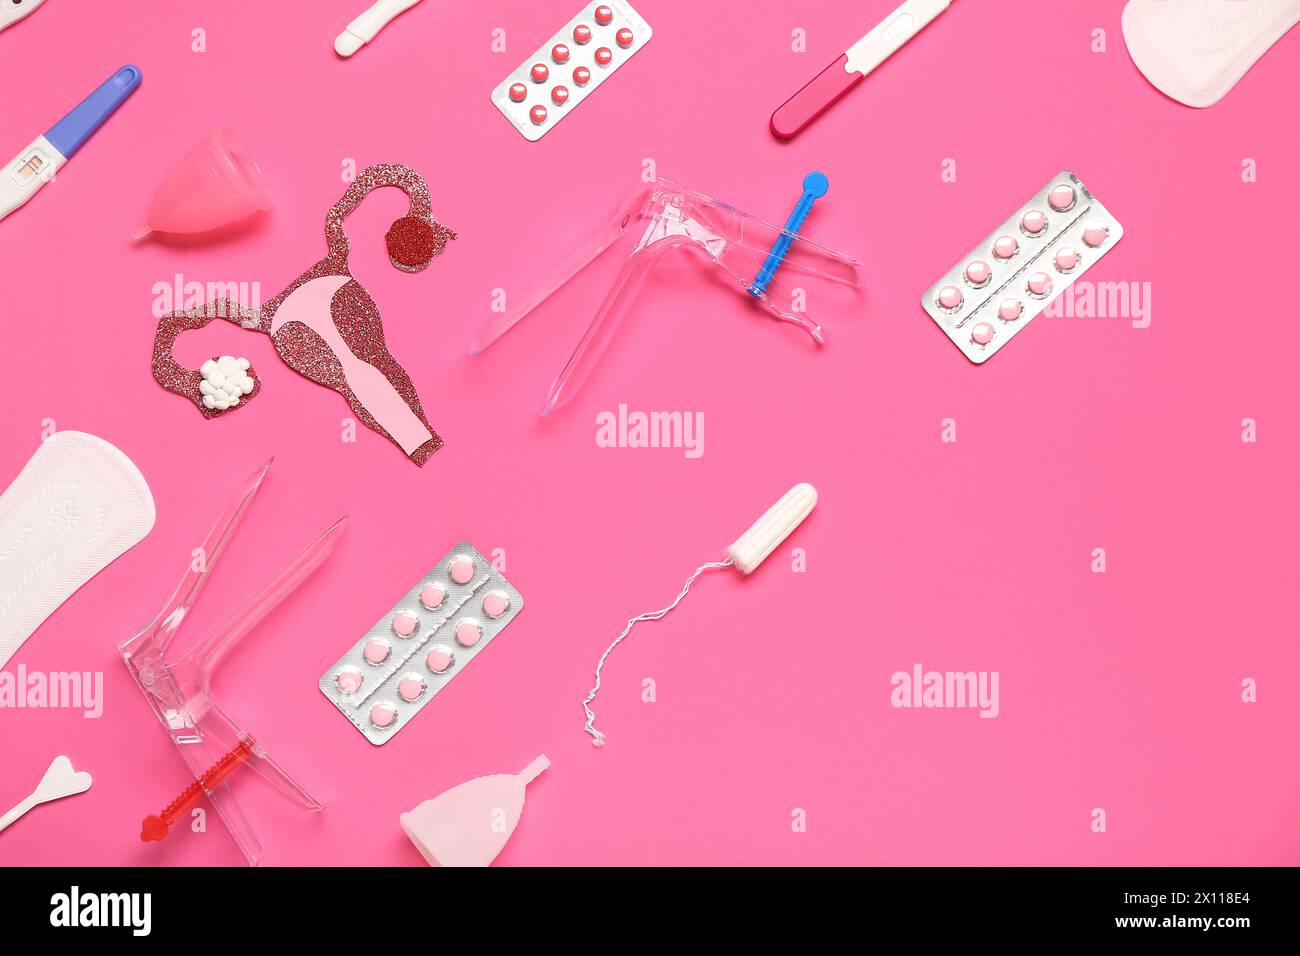 Paper uterus with pills, gynecological speculums and menstrual cups on pink background Stock Photo